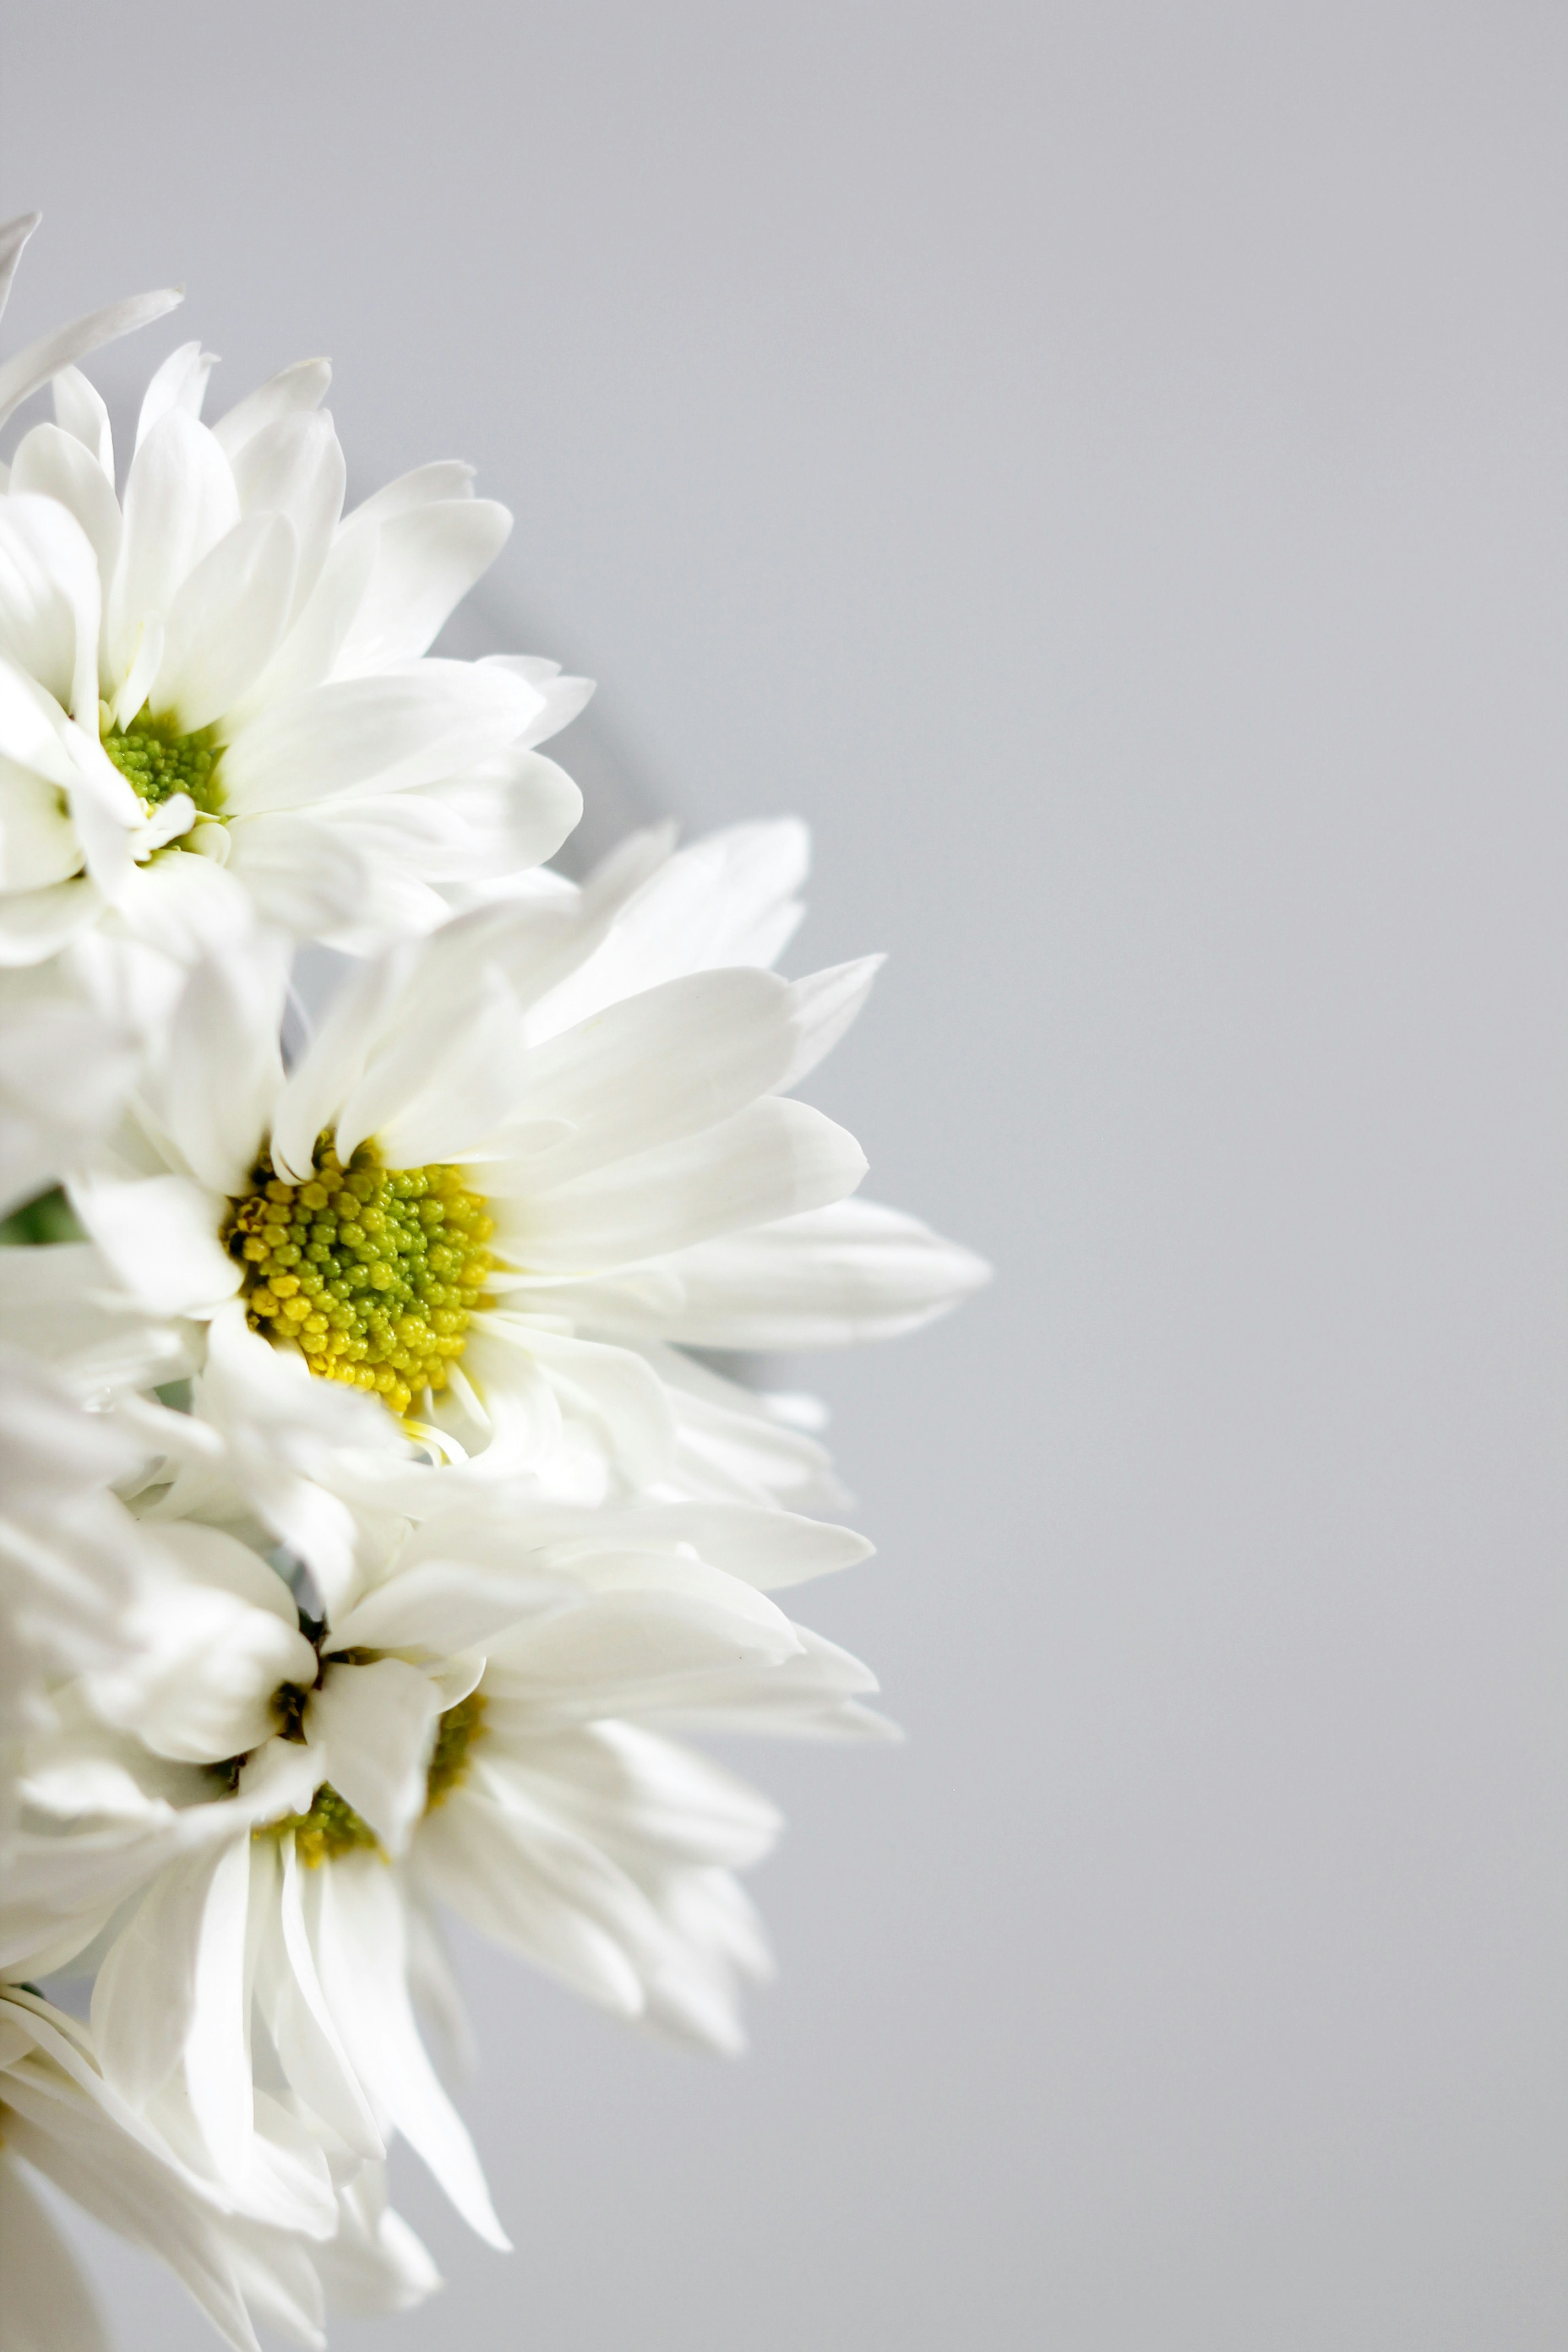 white flower in close up photography